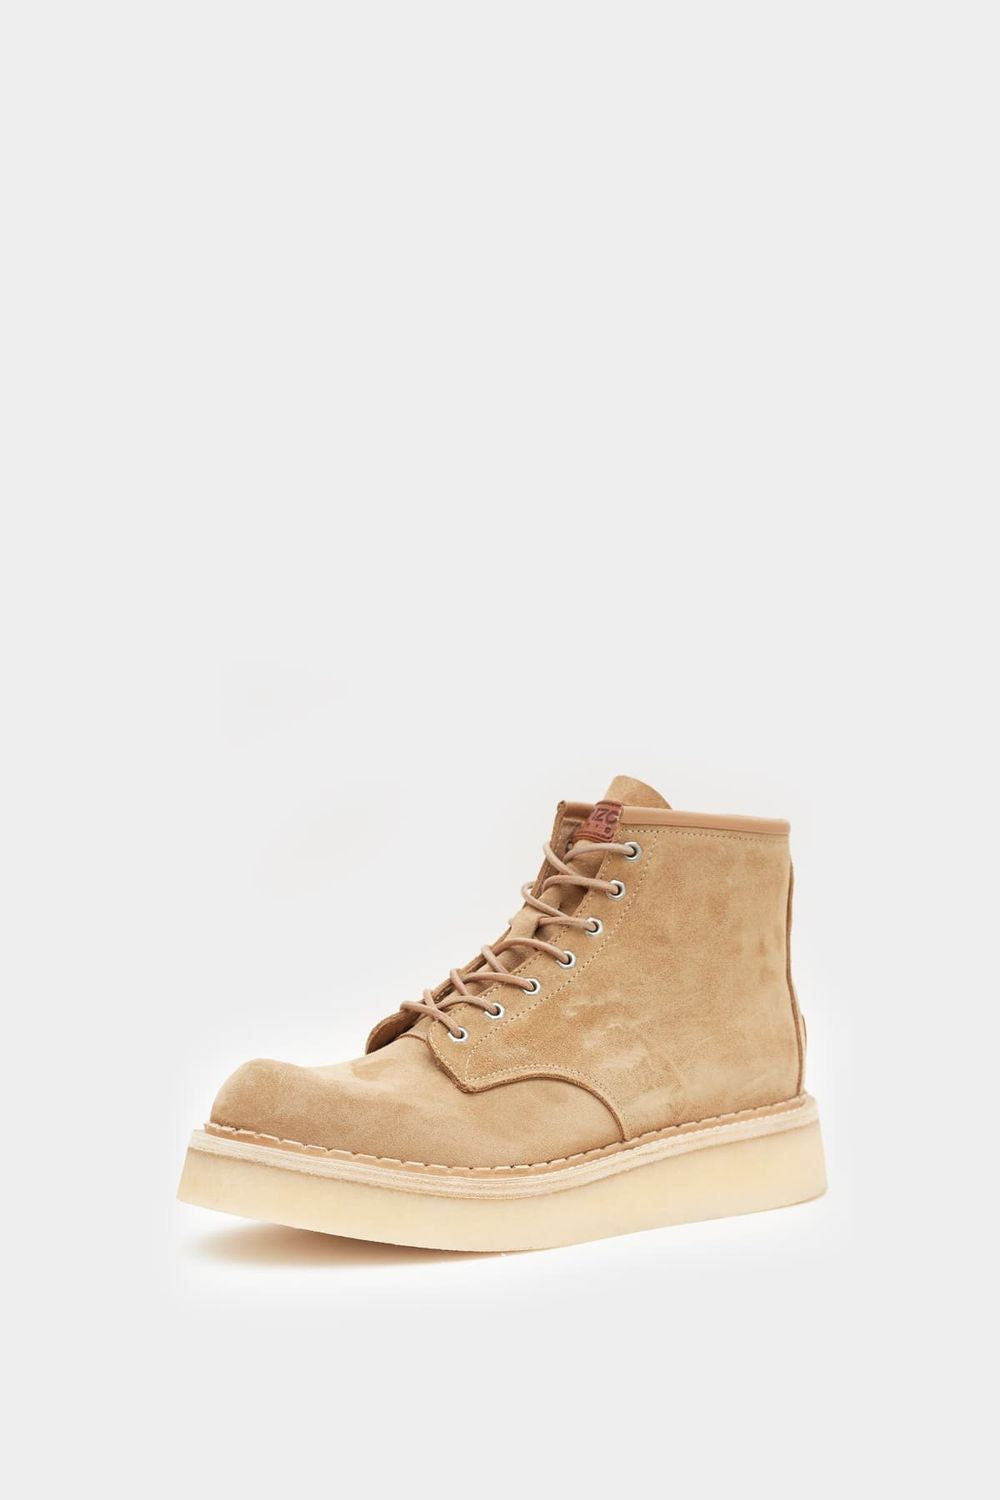 KENZO Men's Tan Leather Boots for SS24